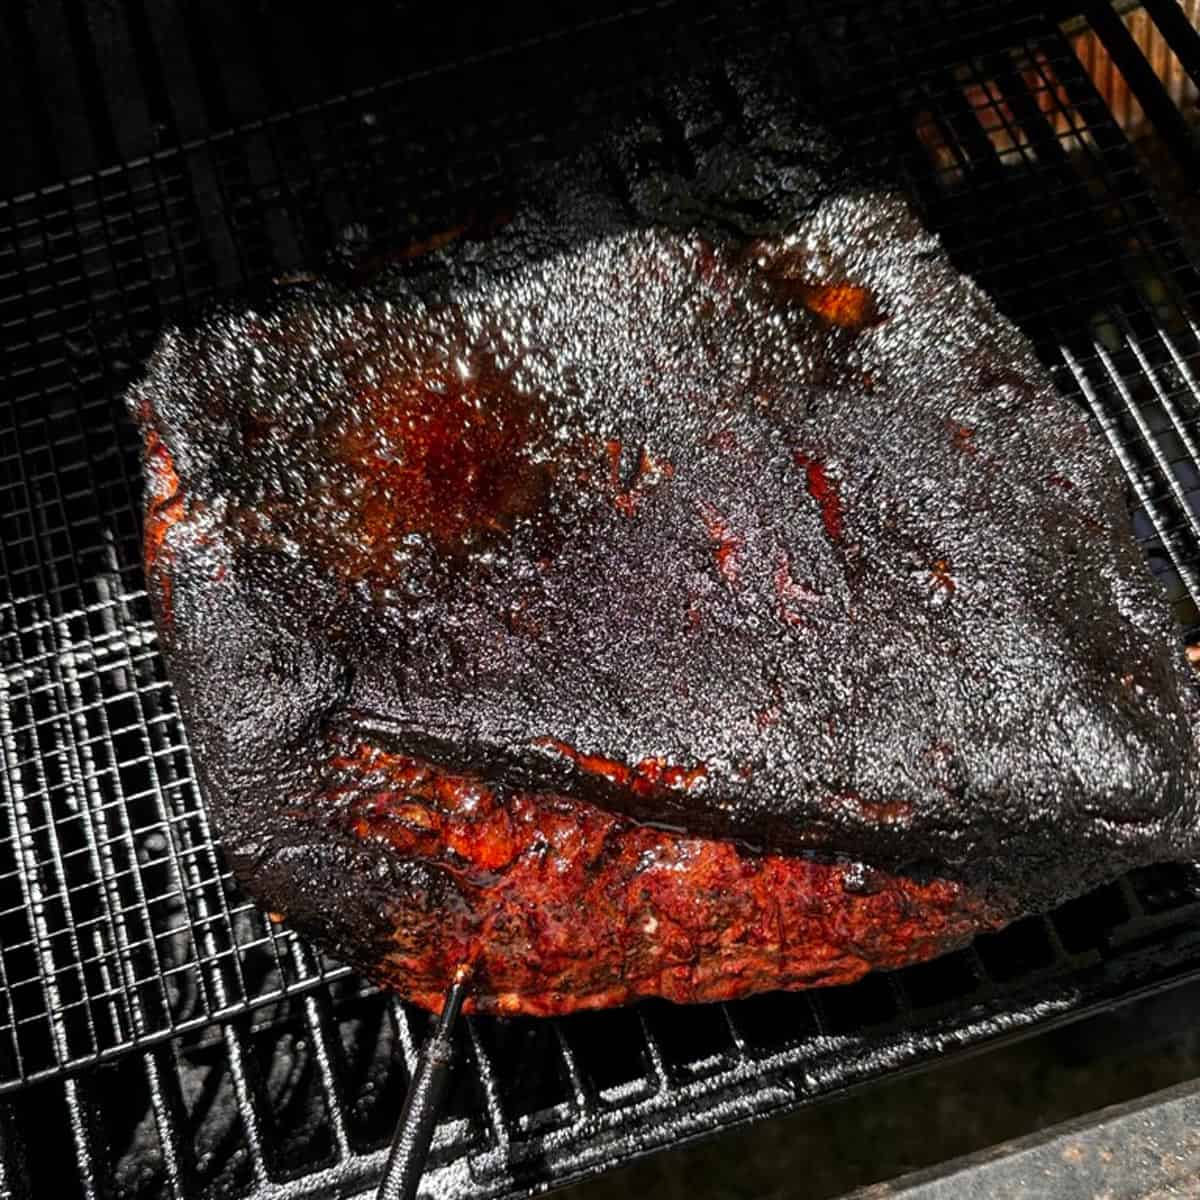 A brisket on a grill